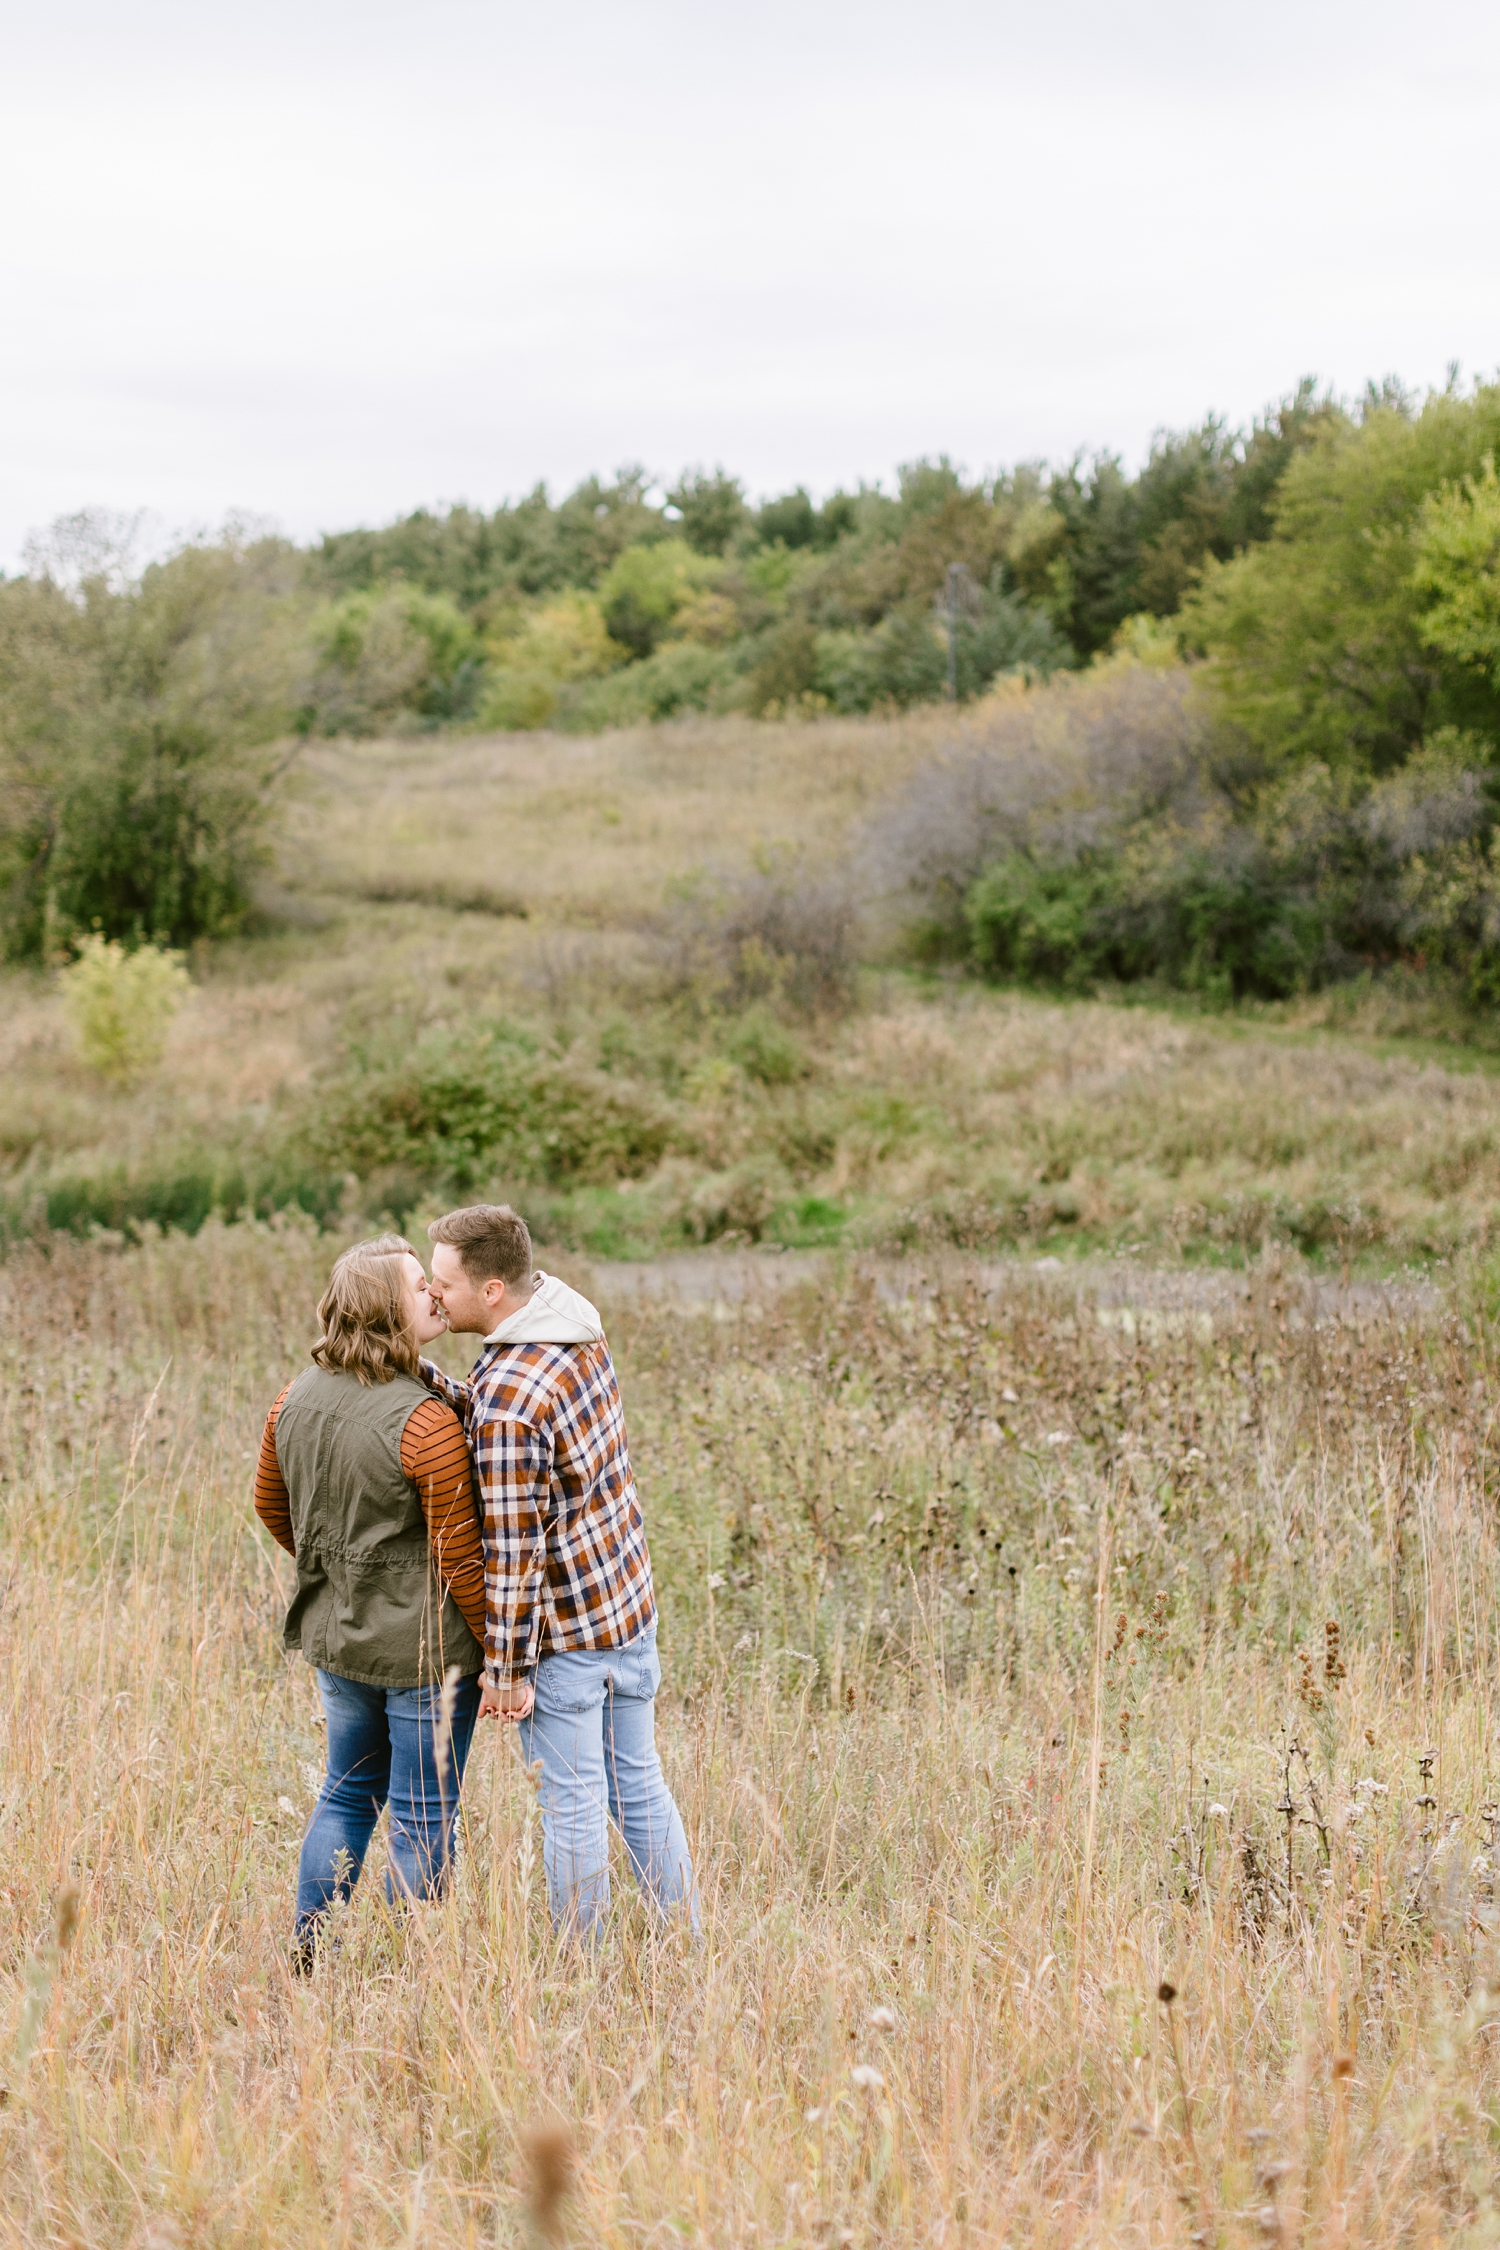 Justin and Kylie share a kiss together in the middle of a prairie grassy field at Water's Edge Nature Center | CB Studio